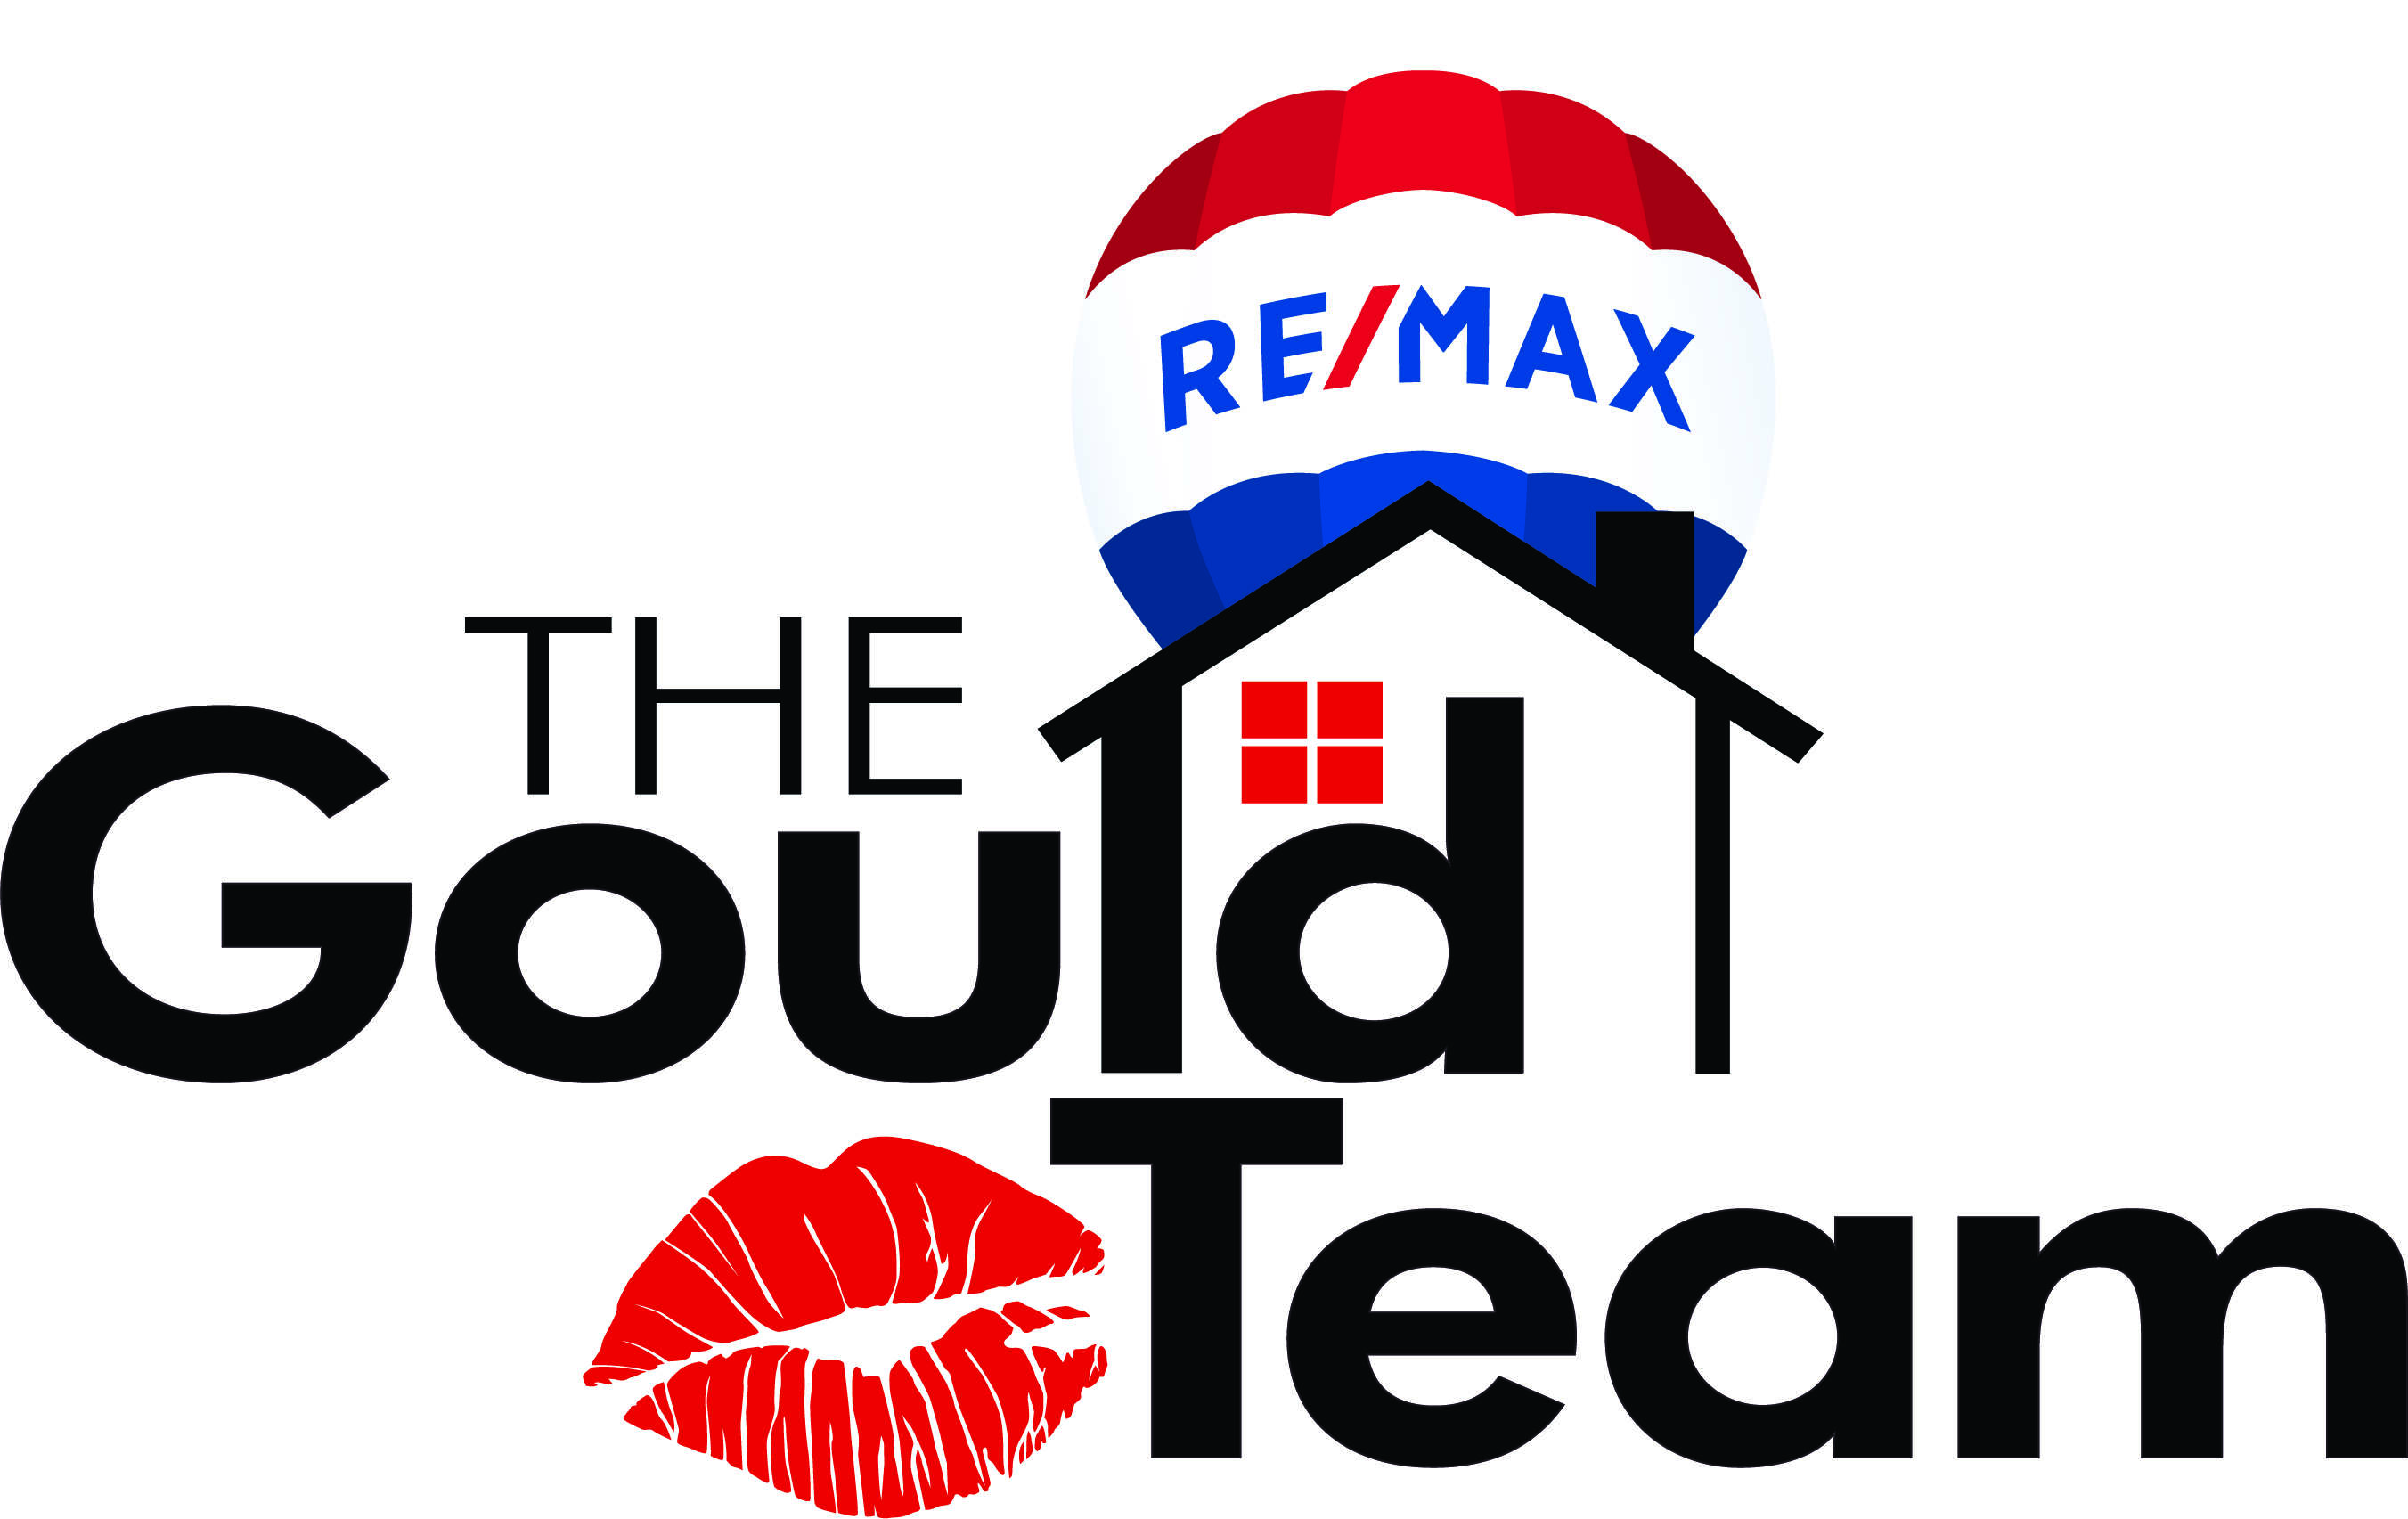 REMAX - THE GOULD TEAM